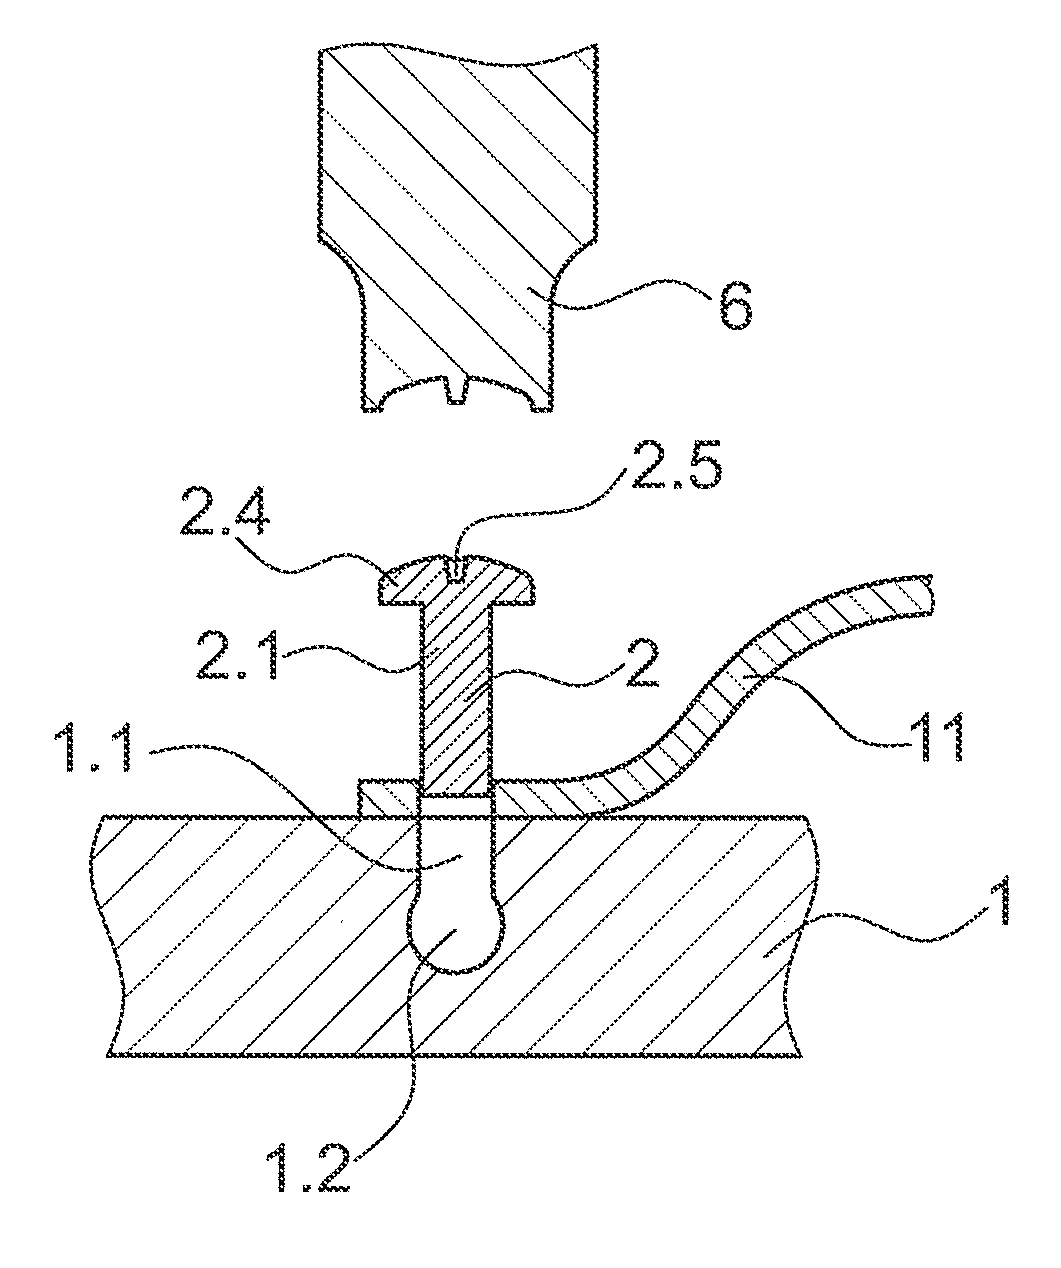 Method for connecting parts relative to one another